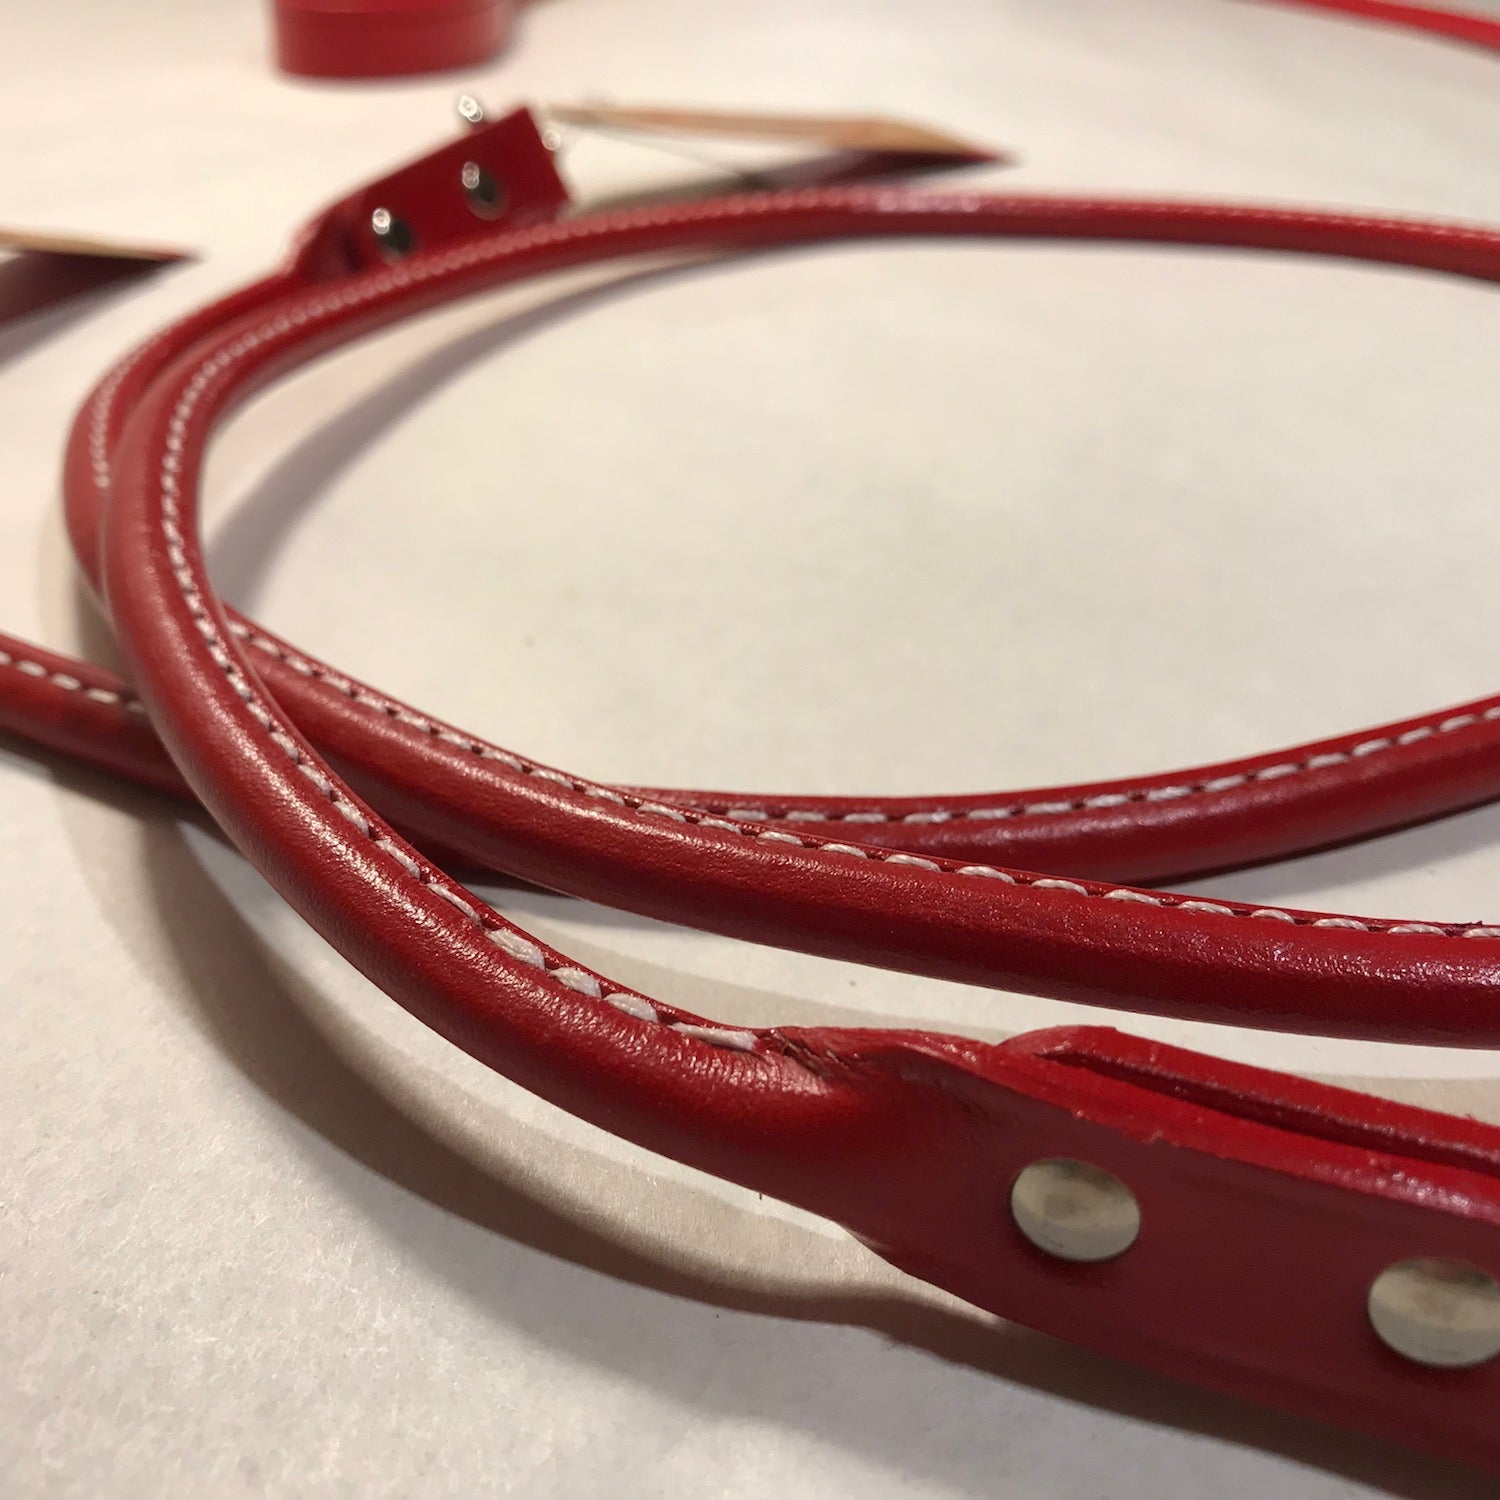 48" Rolled Leather Snap Leash - RED